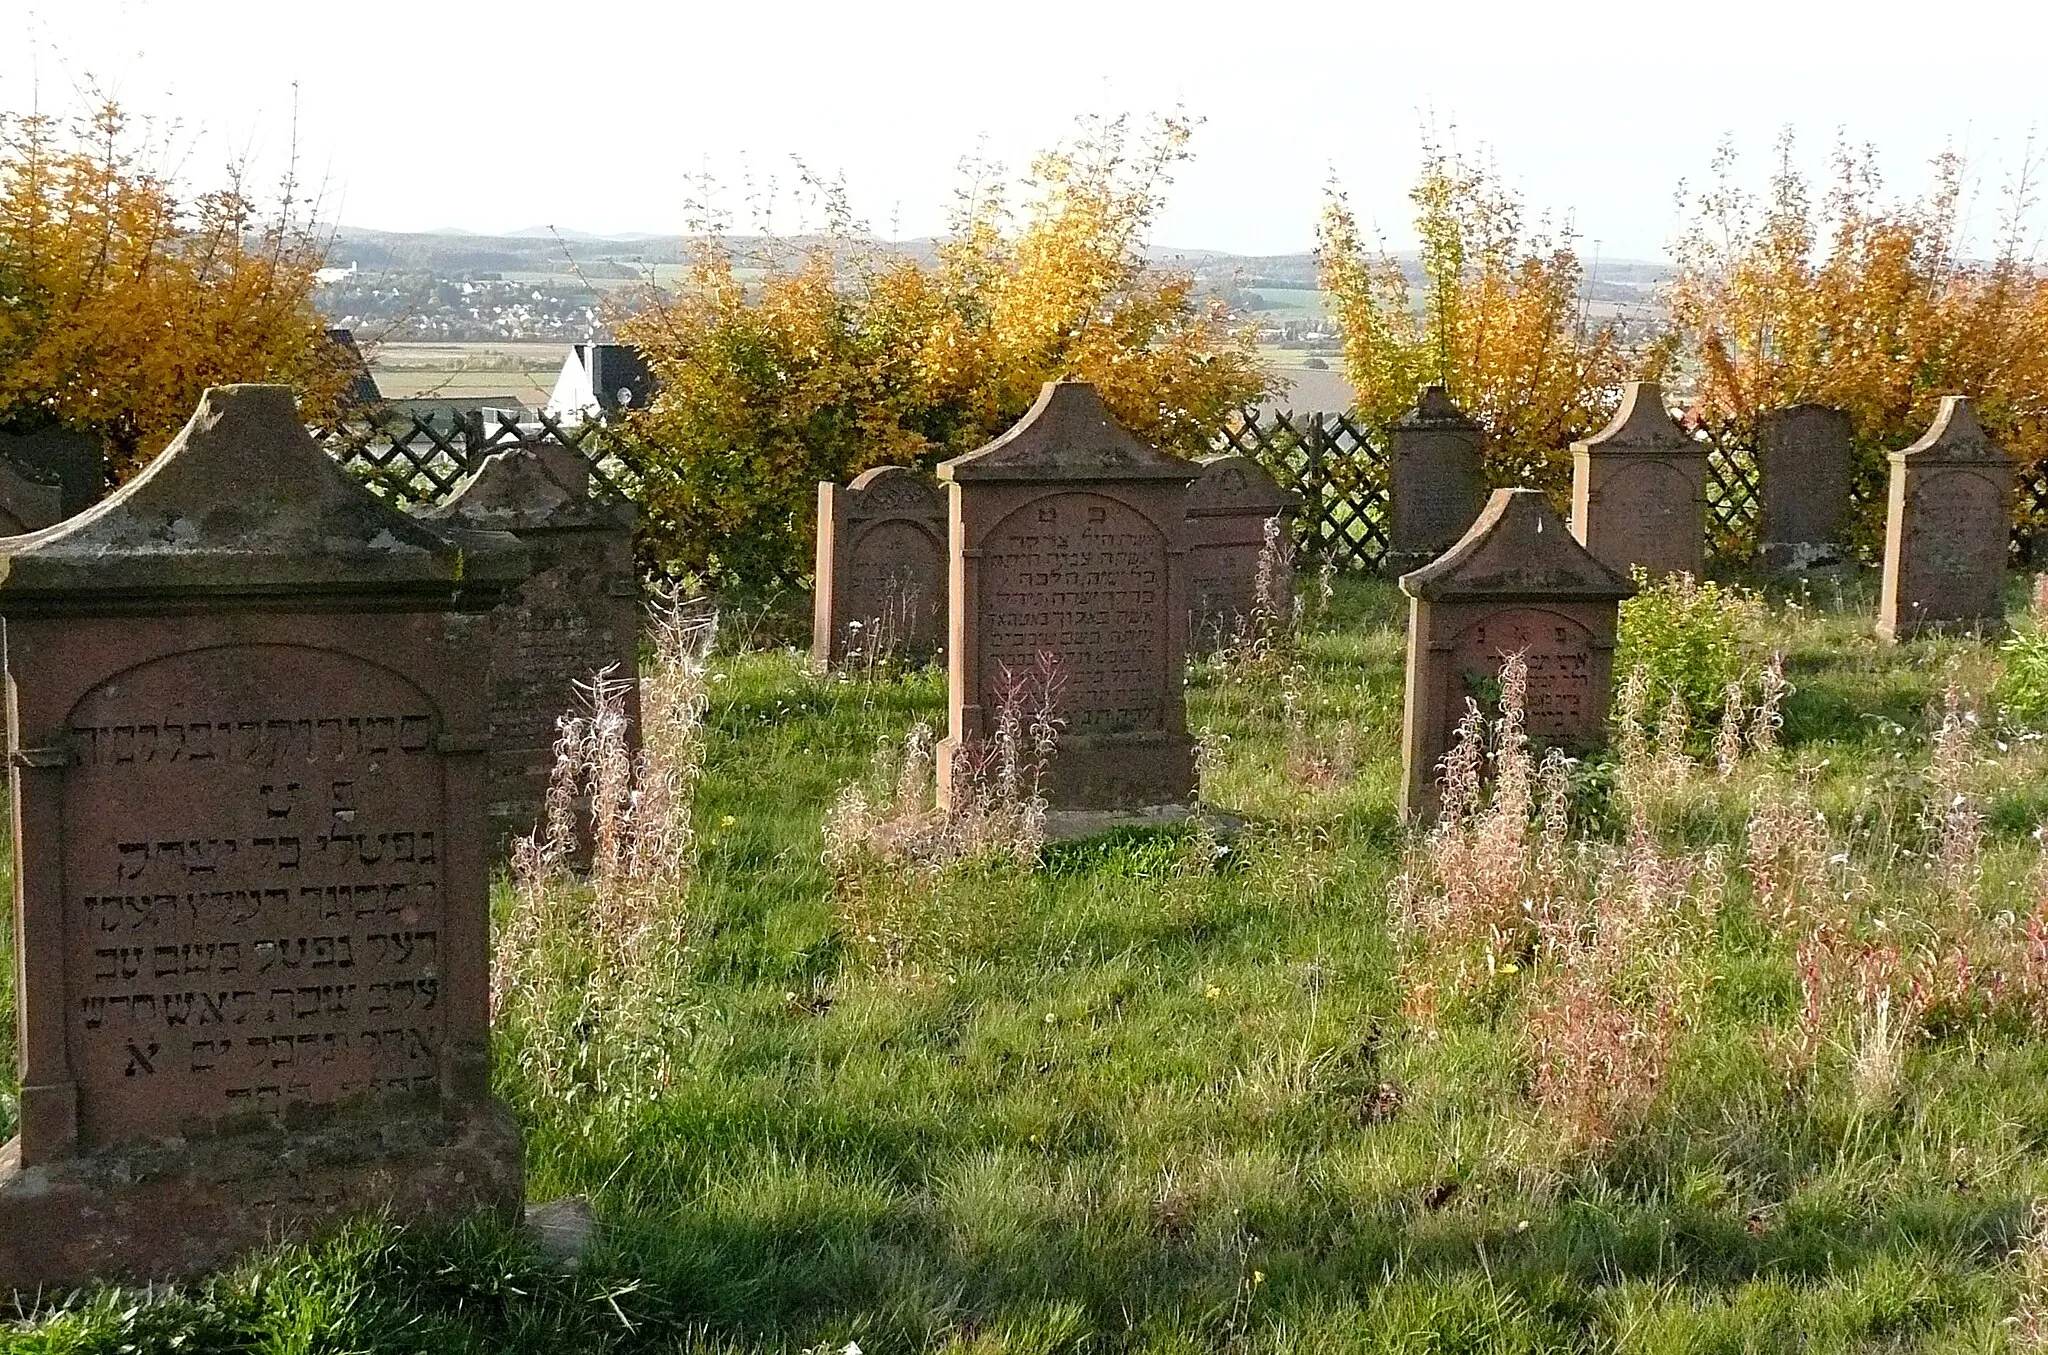 Photo showing: Jewish cemetery in Roth near Marburg, Hesse, Germany